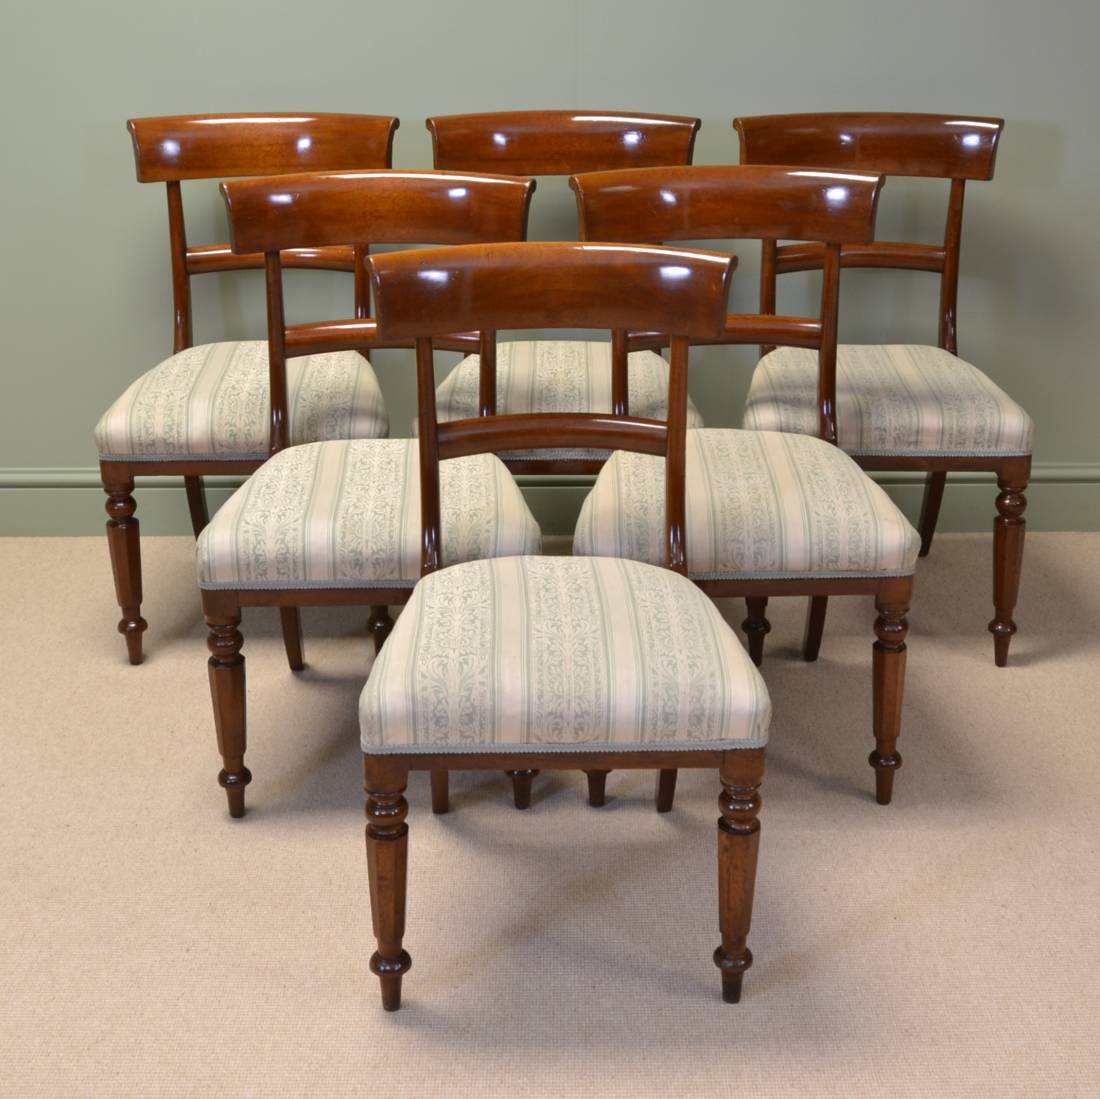 Antique Upholstered Dining Chairs